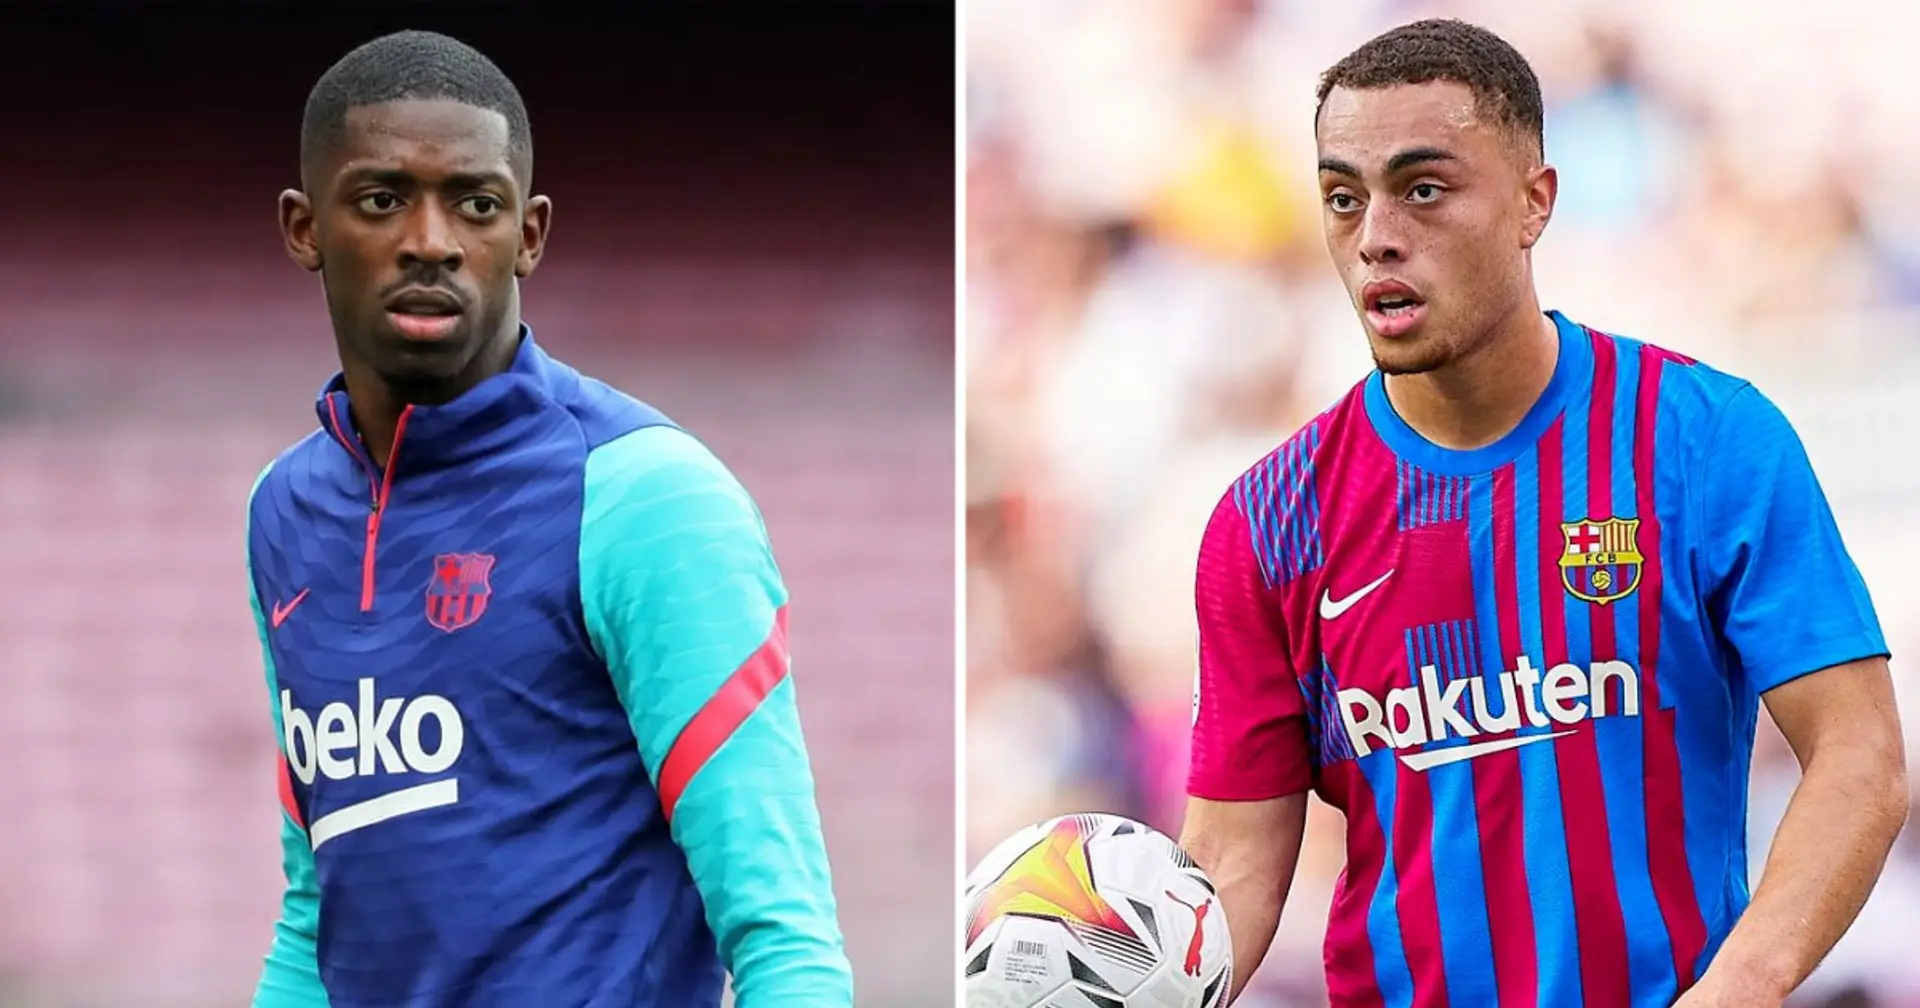 Update on Dembele and Dest injuries provided by reporters